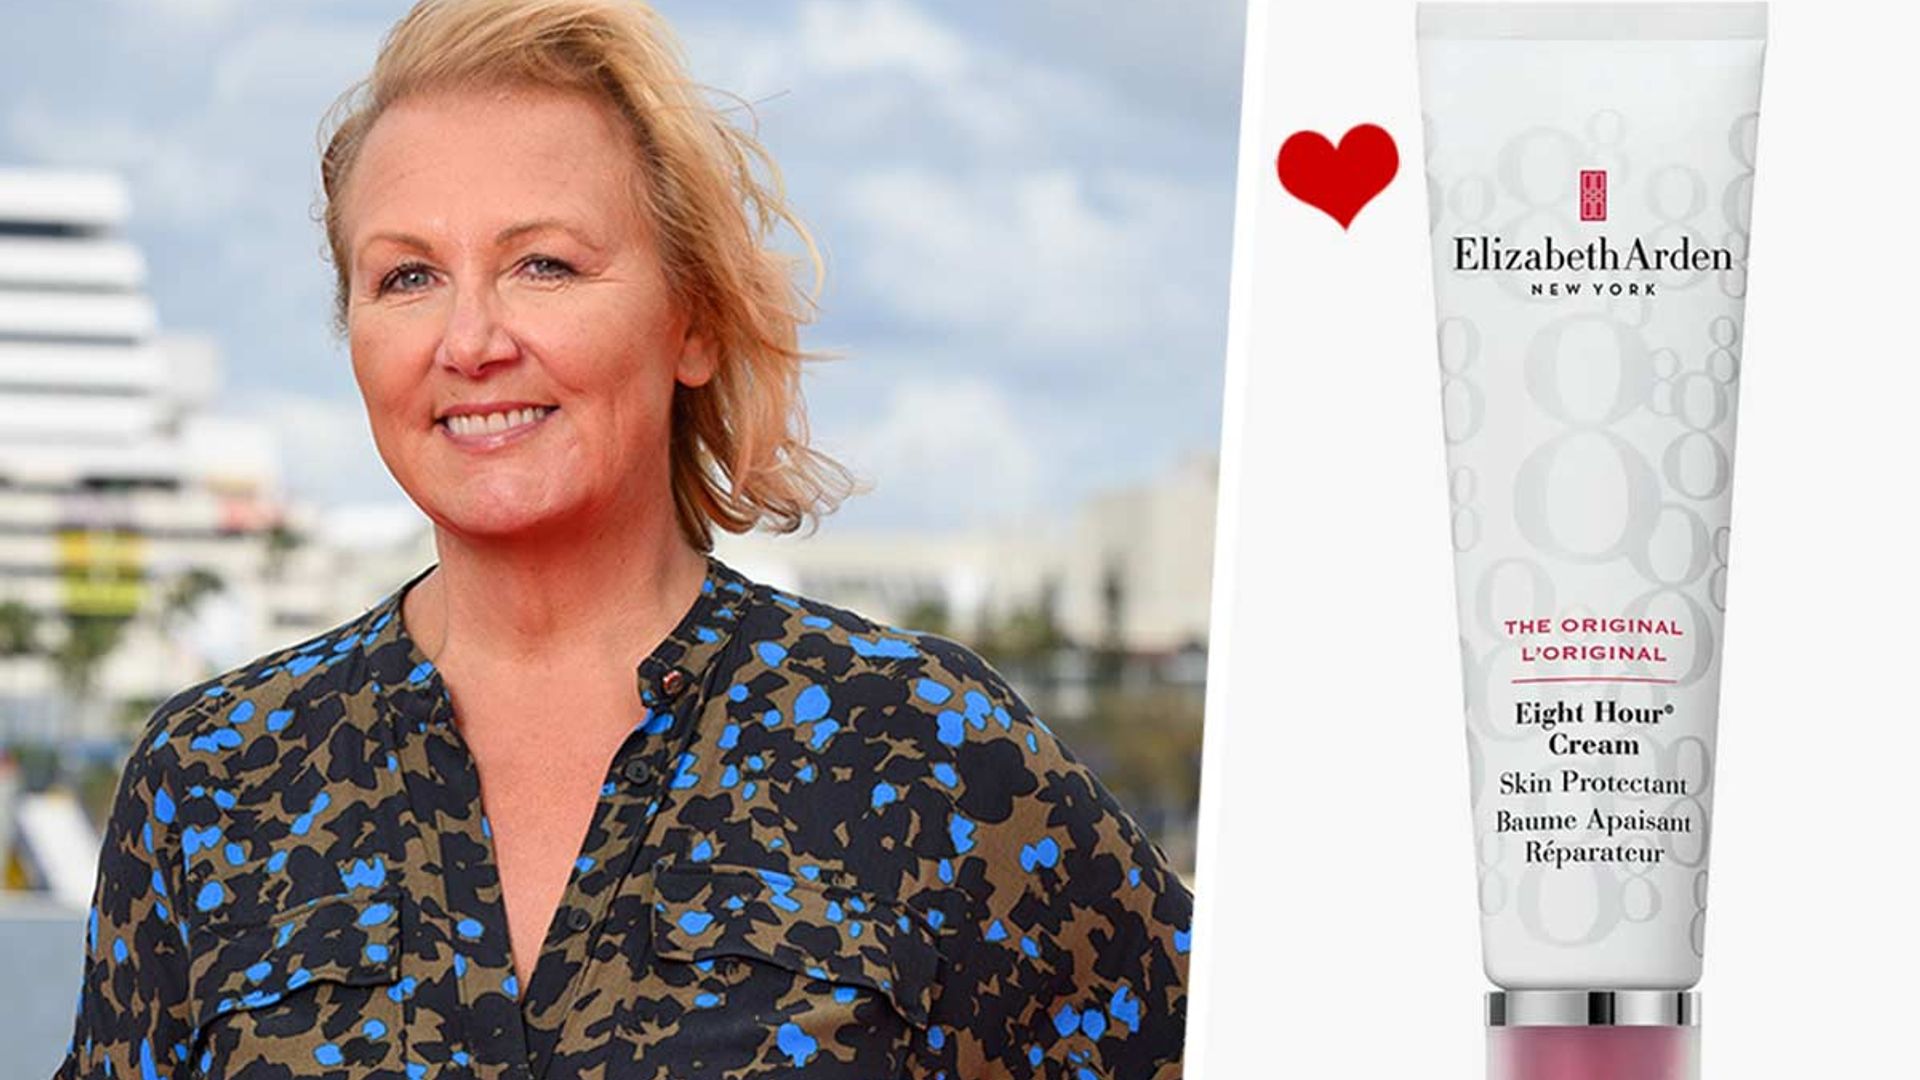 I’m A Celebrity’s Sue Cleaver swears by the £20 Elizabeth Arden face cream